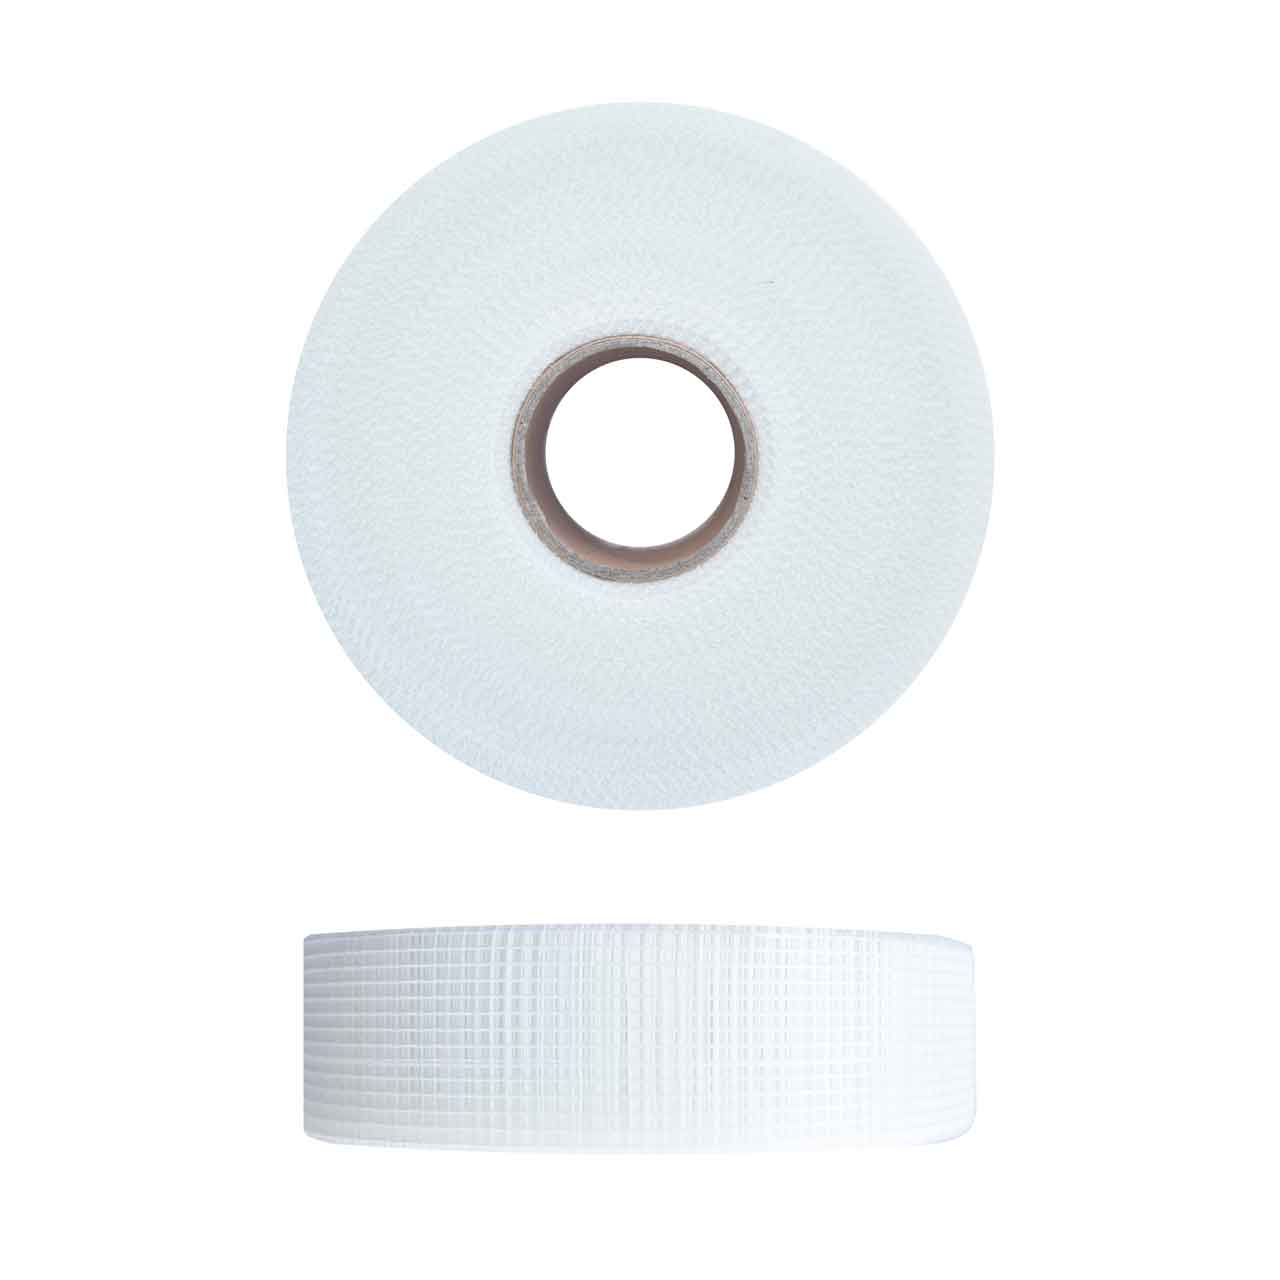 DRY WALL JOINT TAPE 48MM X 90M